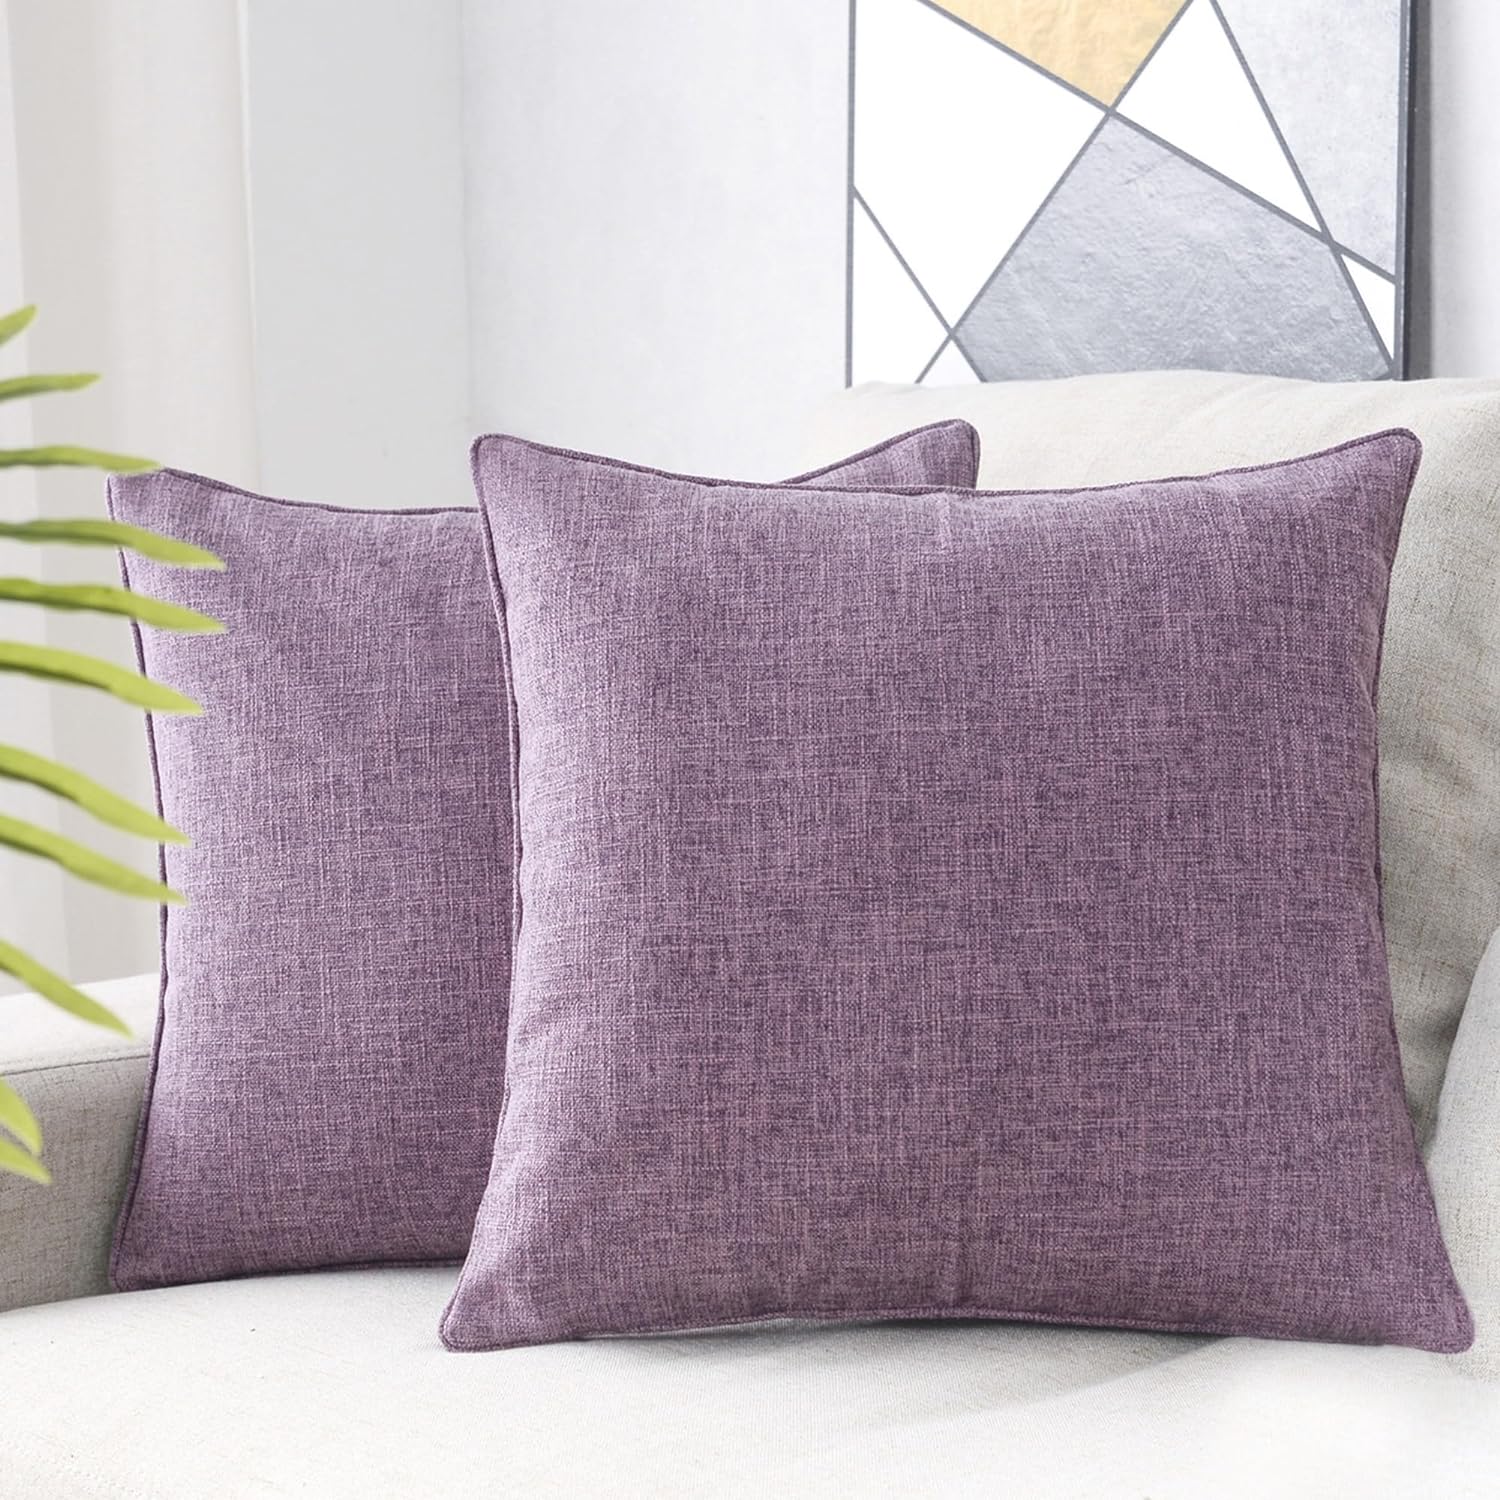 HPUK Linen Throw Pillow Covers Pack of 2, 18x18 Inch Accent Cushion Covers for Living Room, Bedroom, Decorative Solid Color Pillow Covers for Couch, Sofa, Chair, Lavender Mist